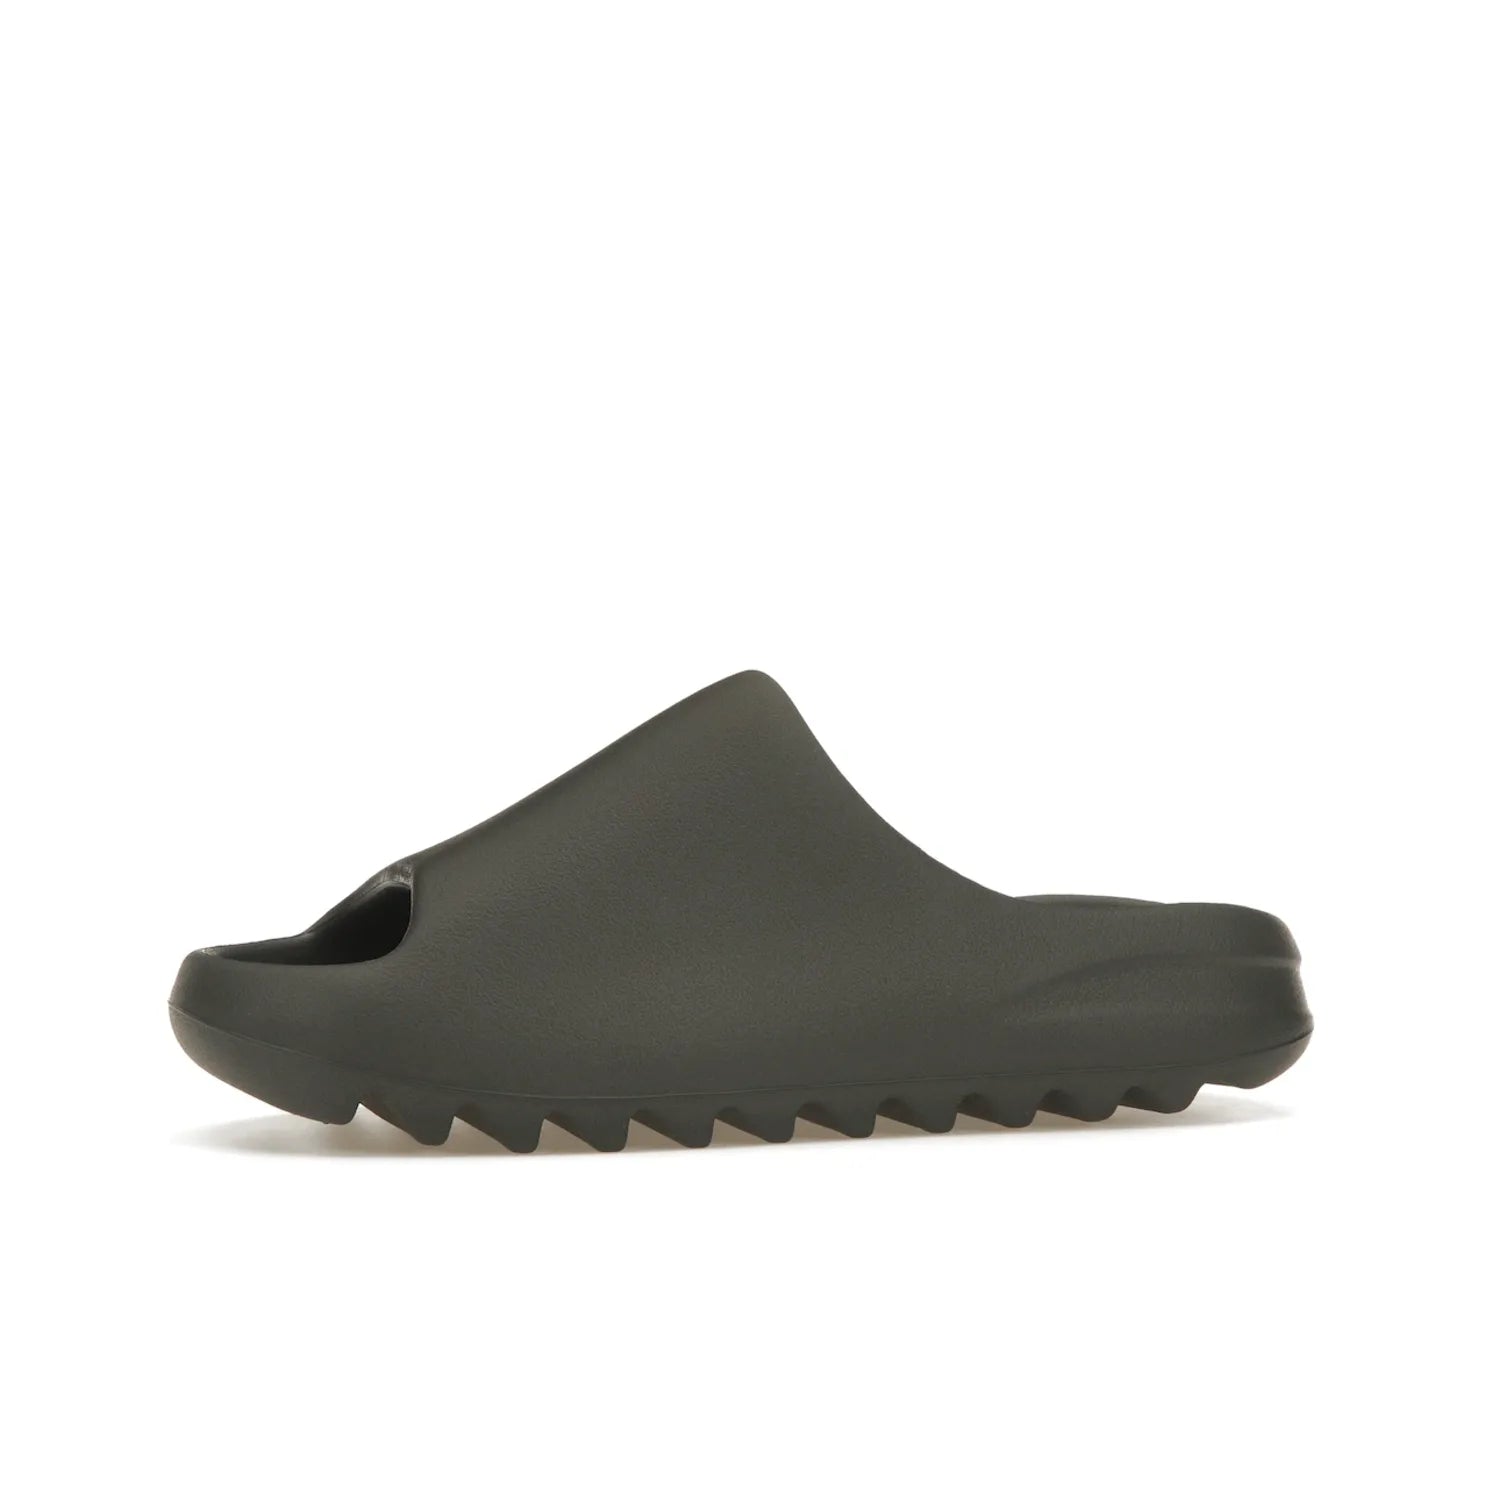 adidas Yeezy Slide Granite - Image 17 - Only at www.BallersClubKickz.com - Introducing the adidas Yeezy Slide Granite with a sleek, soft-to-touch one-piece upper – perfect for making a statement with its minimalistic design and luxurious comfort. Get yours now for only $70.